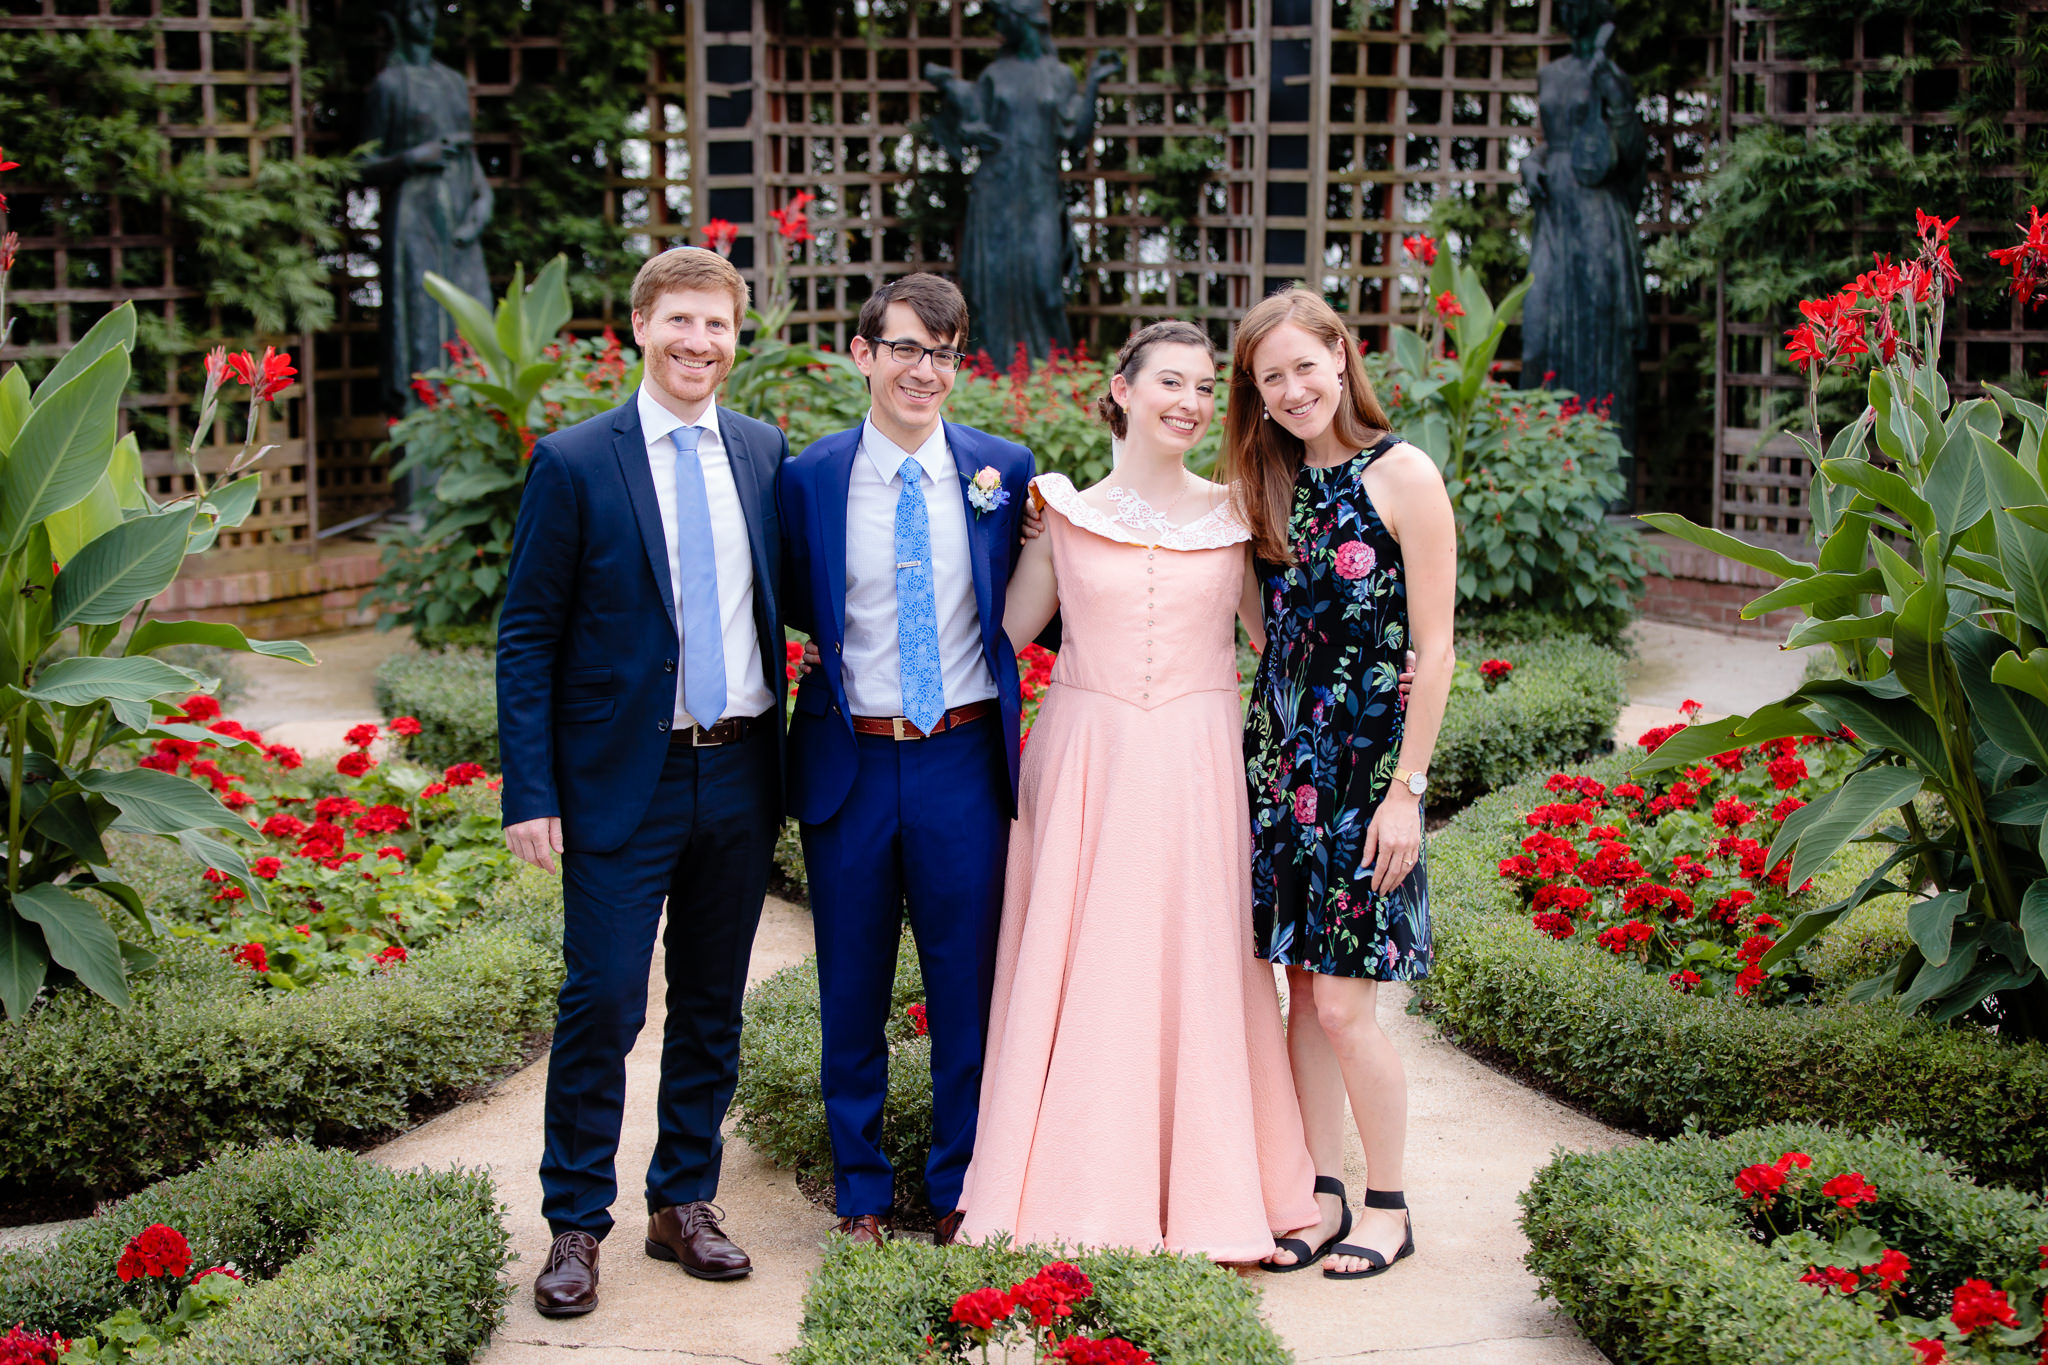 Bride & groom pose with their witnesses in the Broderie Room at Phipps Conservatory